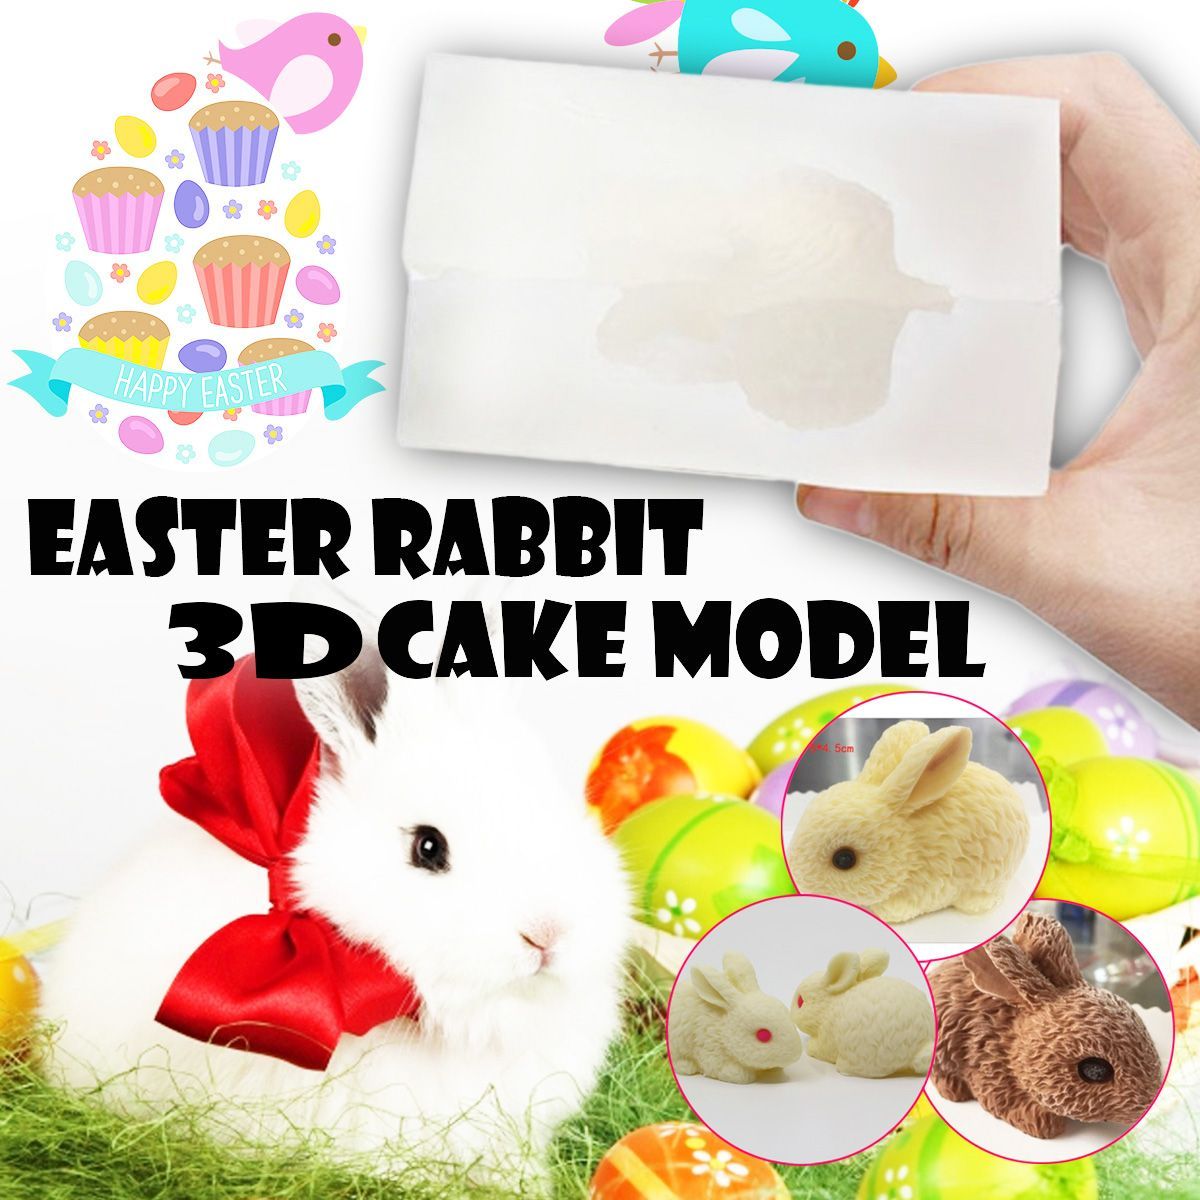 Bunny-3D-DIY-Rabbit-Handmade-Cake-Breads-Decorating-Chocolates-Mold-Mould-Easter-1563902